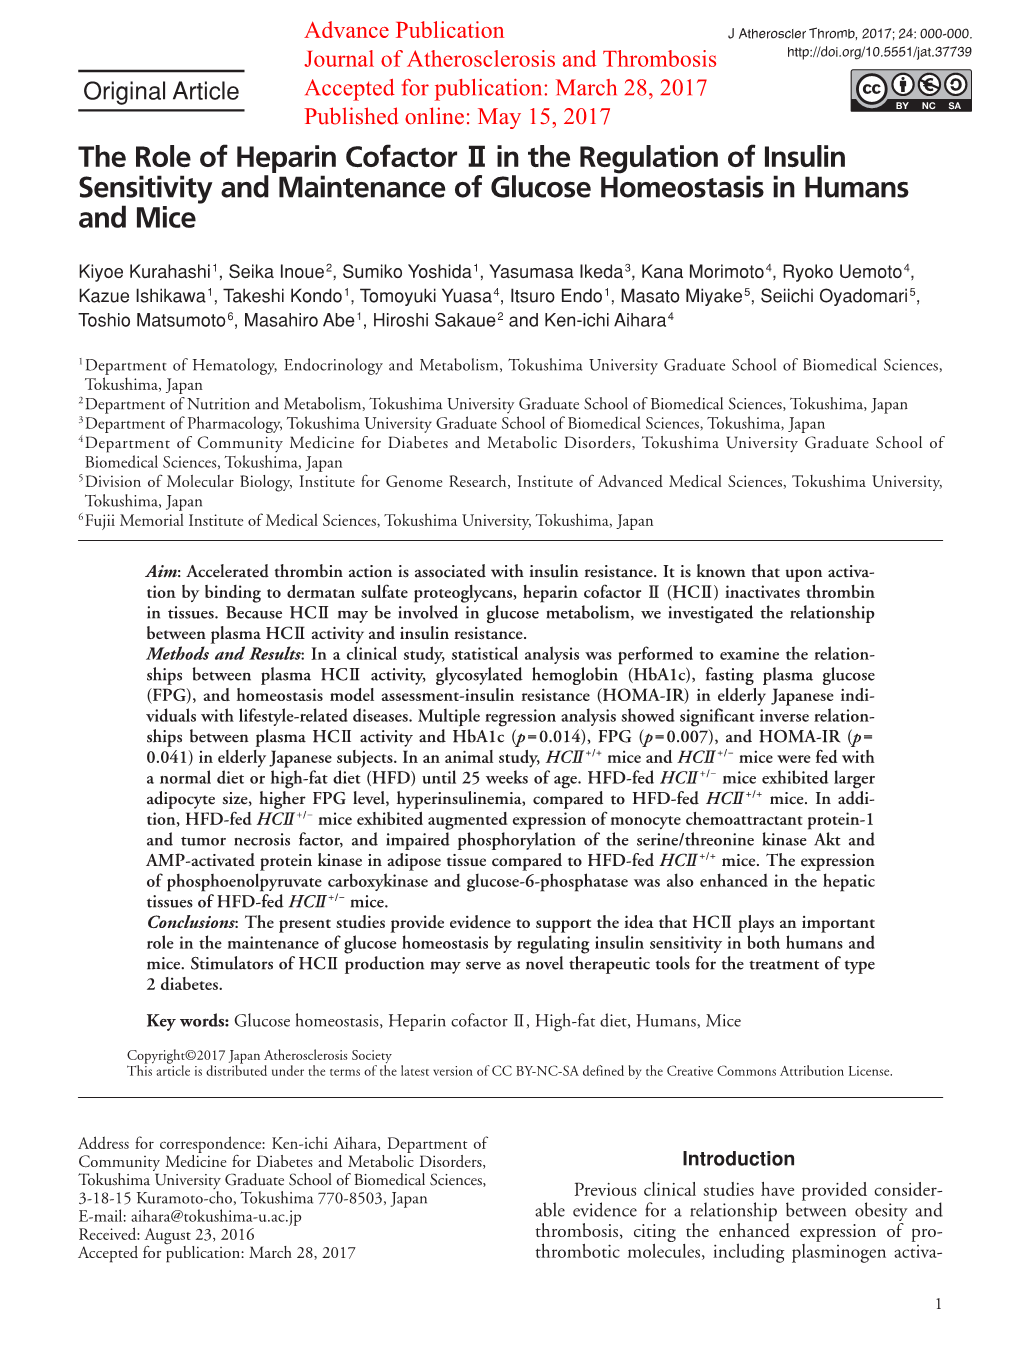 The Role of Heparin Cofactor Ⅱ in the Regulation of Insulin Sensitivity and Maintenance of Glucose Homeostasis in Humans and Mice